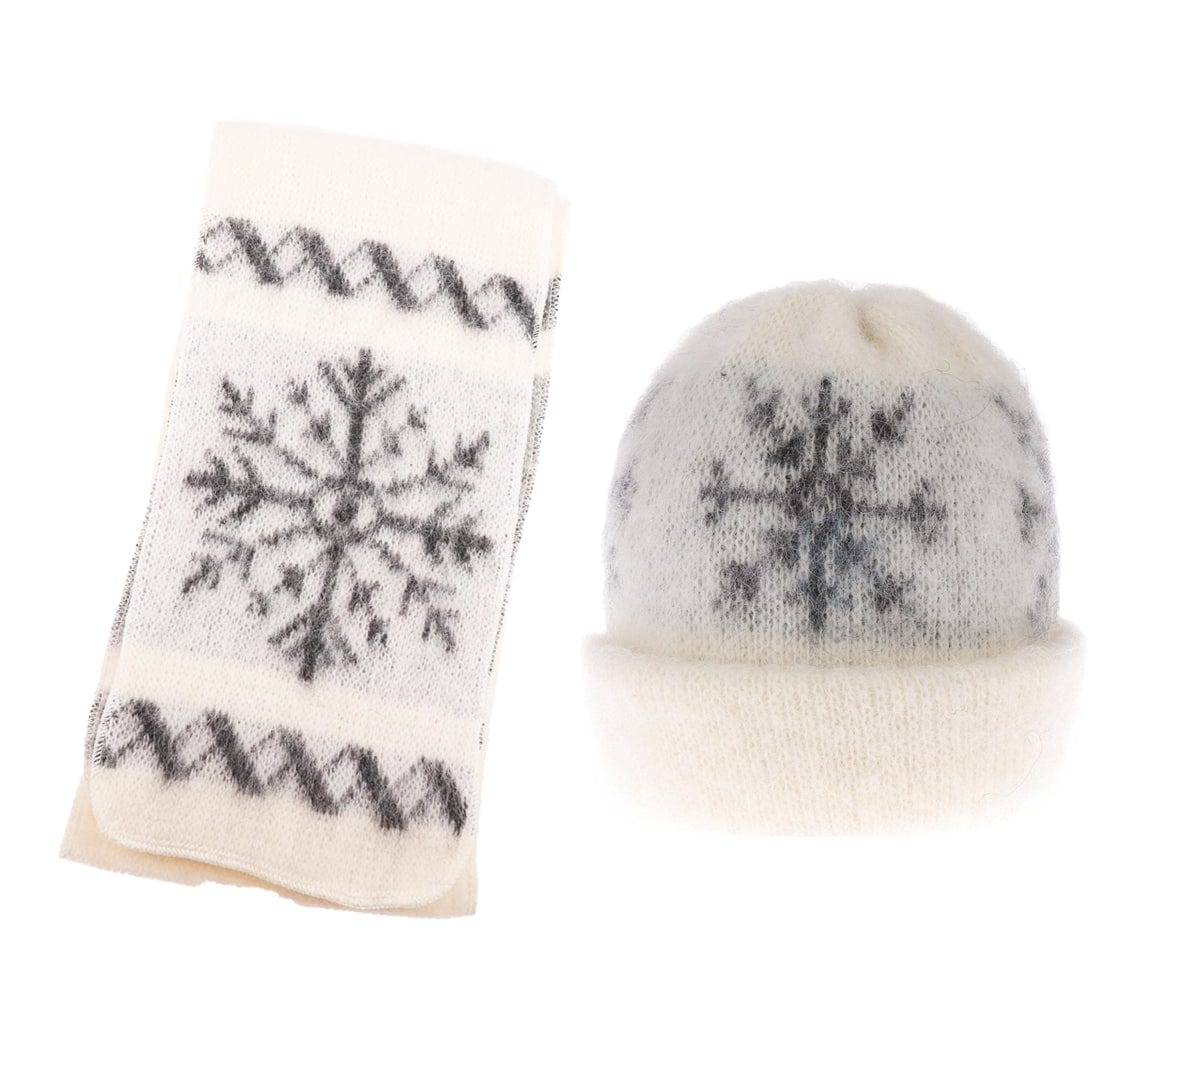 Knitted woolen beanie and scarf with snowflake. Iceland design